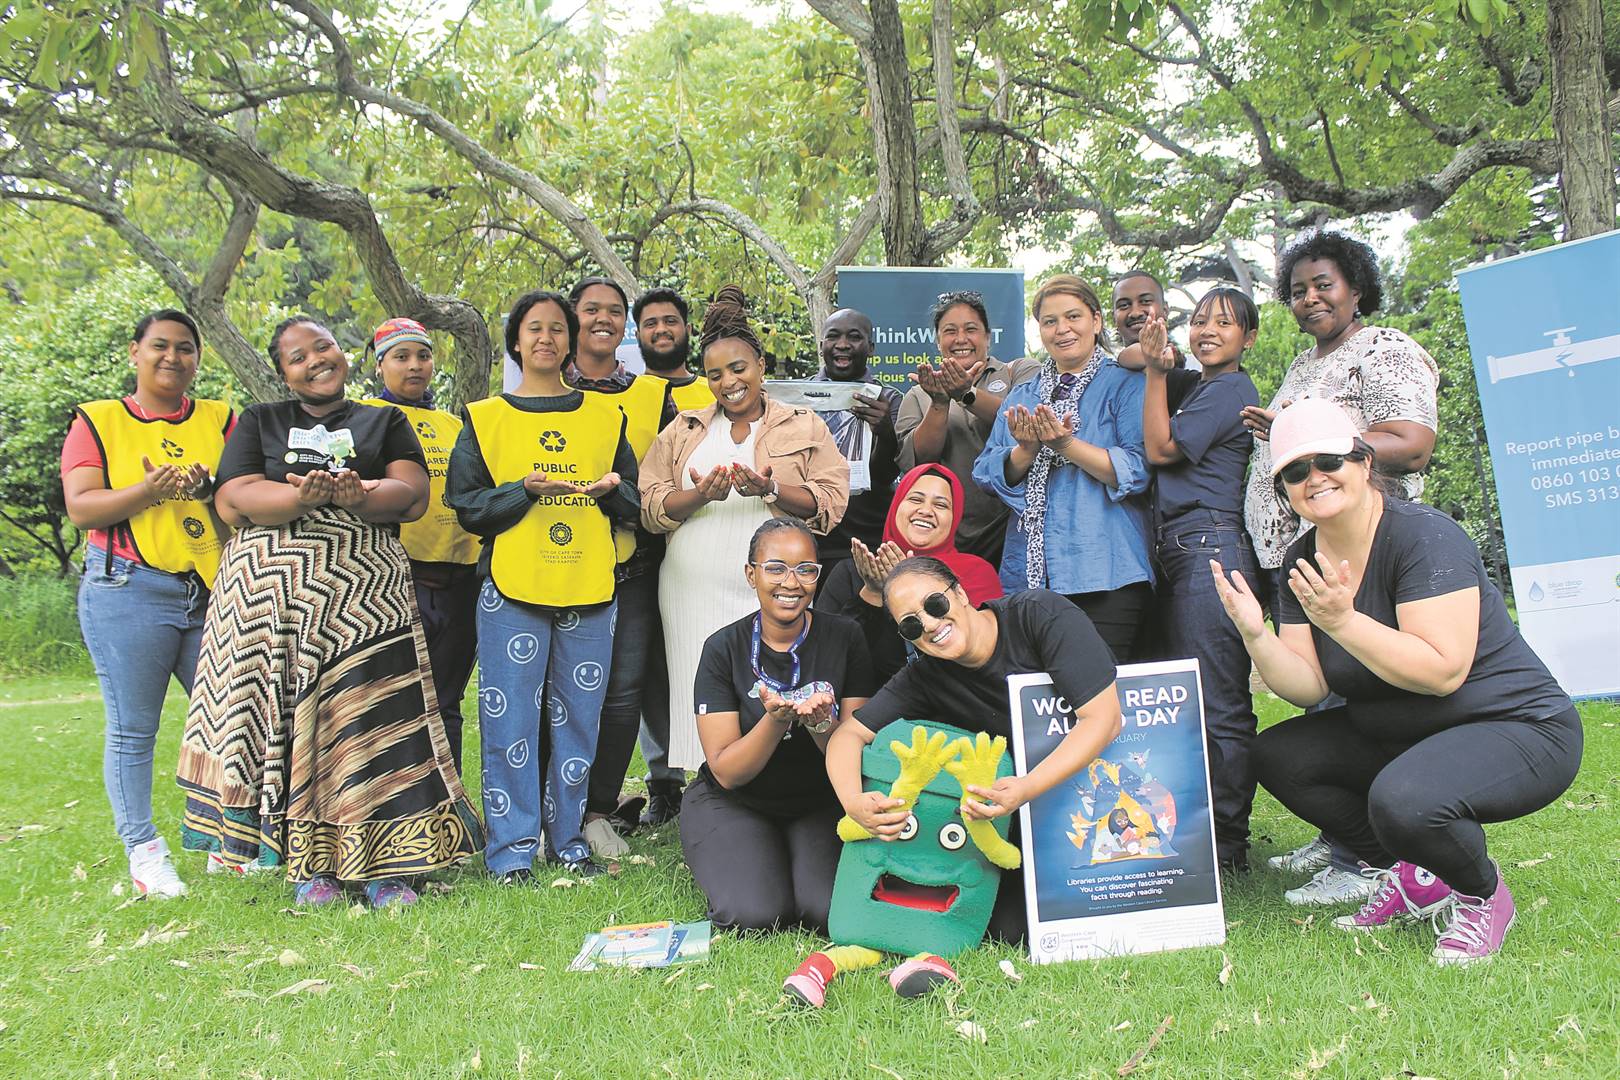 For this occasion other City partners such as the City’s Water and Sanitation, Urban Waste Management and Biodiversity public awareness teams were also invited to enrich the little ones’ lives with practical information that forms part of their daily lives.